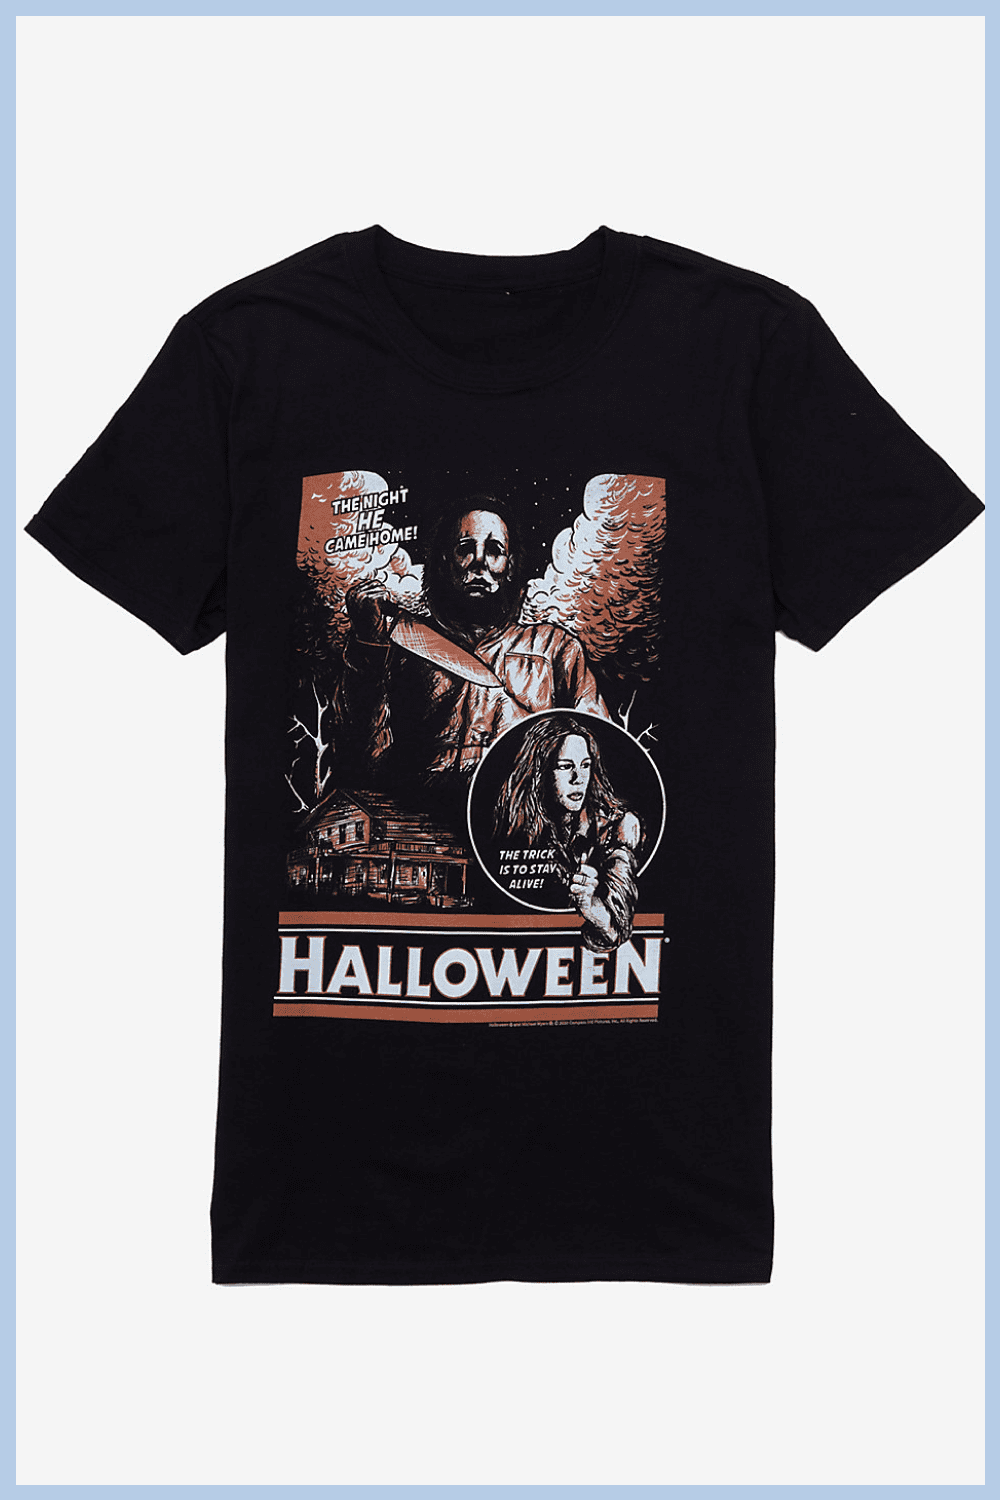 Halloween t-shirt in the style of rock.